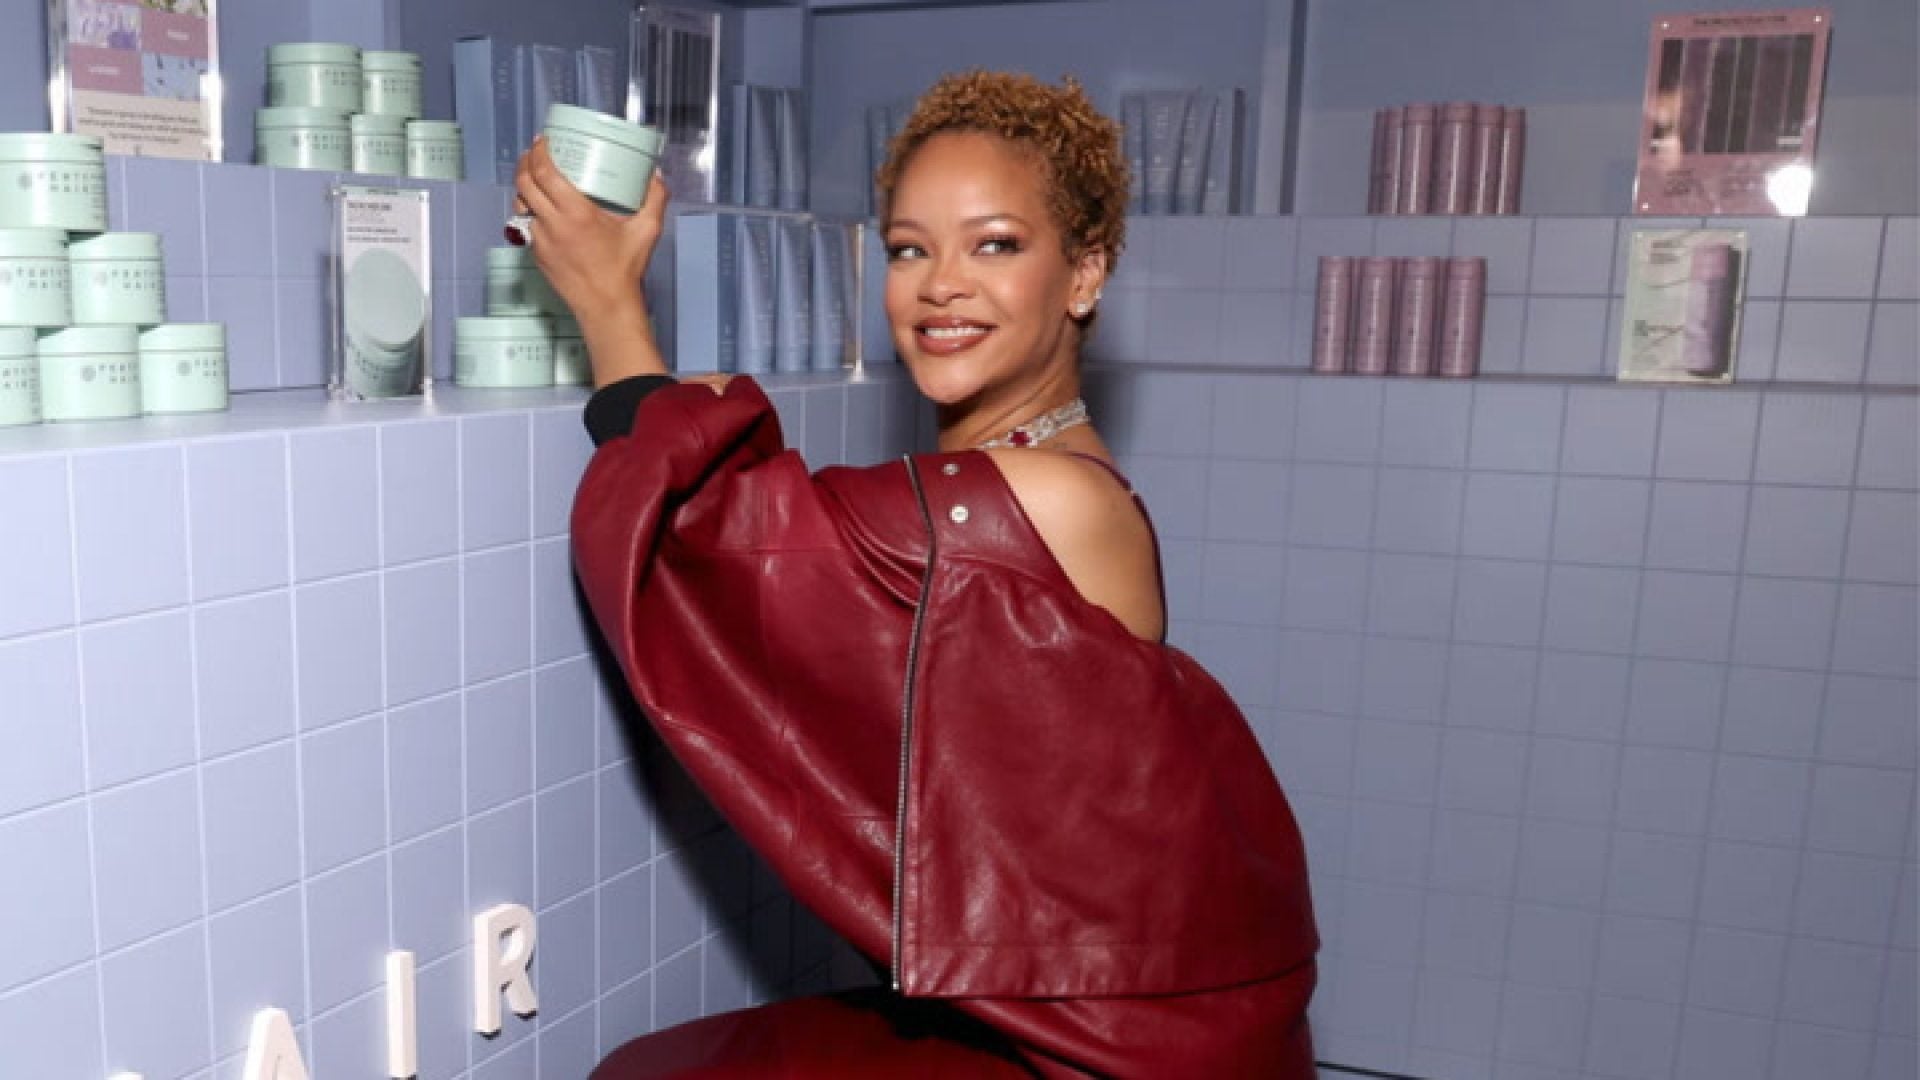 WATCH: We Spoke With Rihanna About Fenty Hair And Her Favorite Hair Era